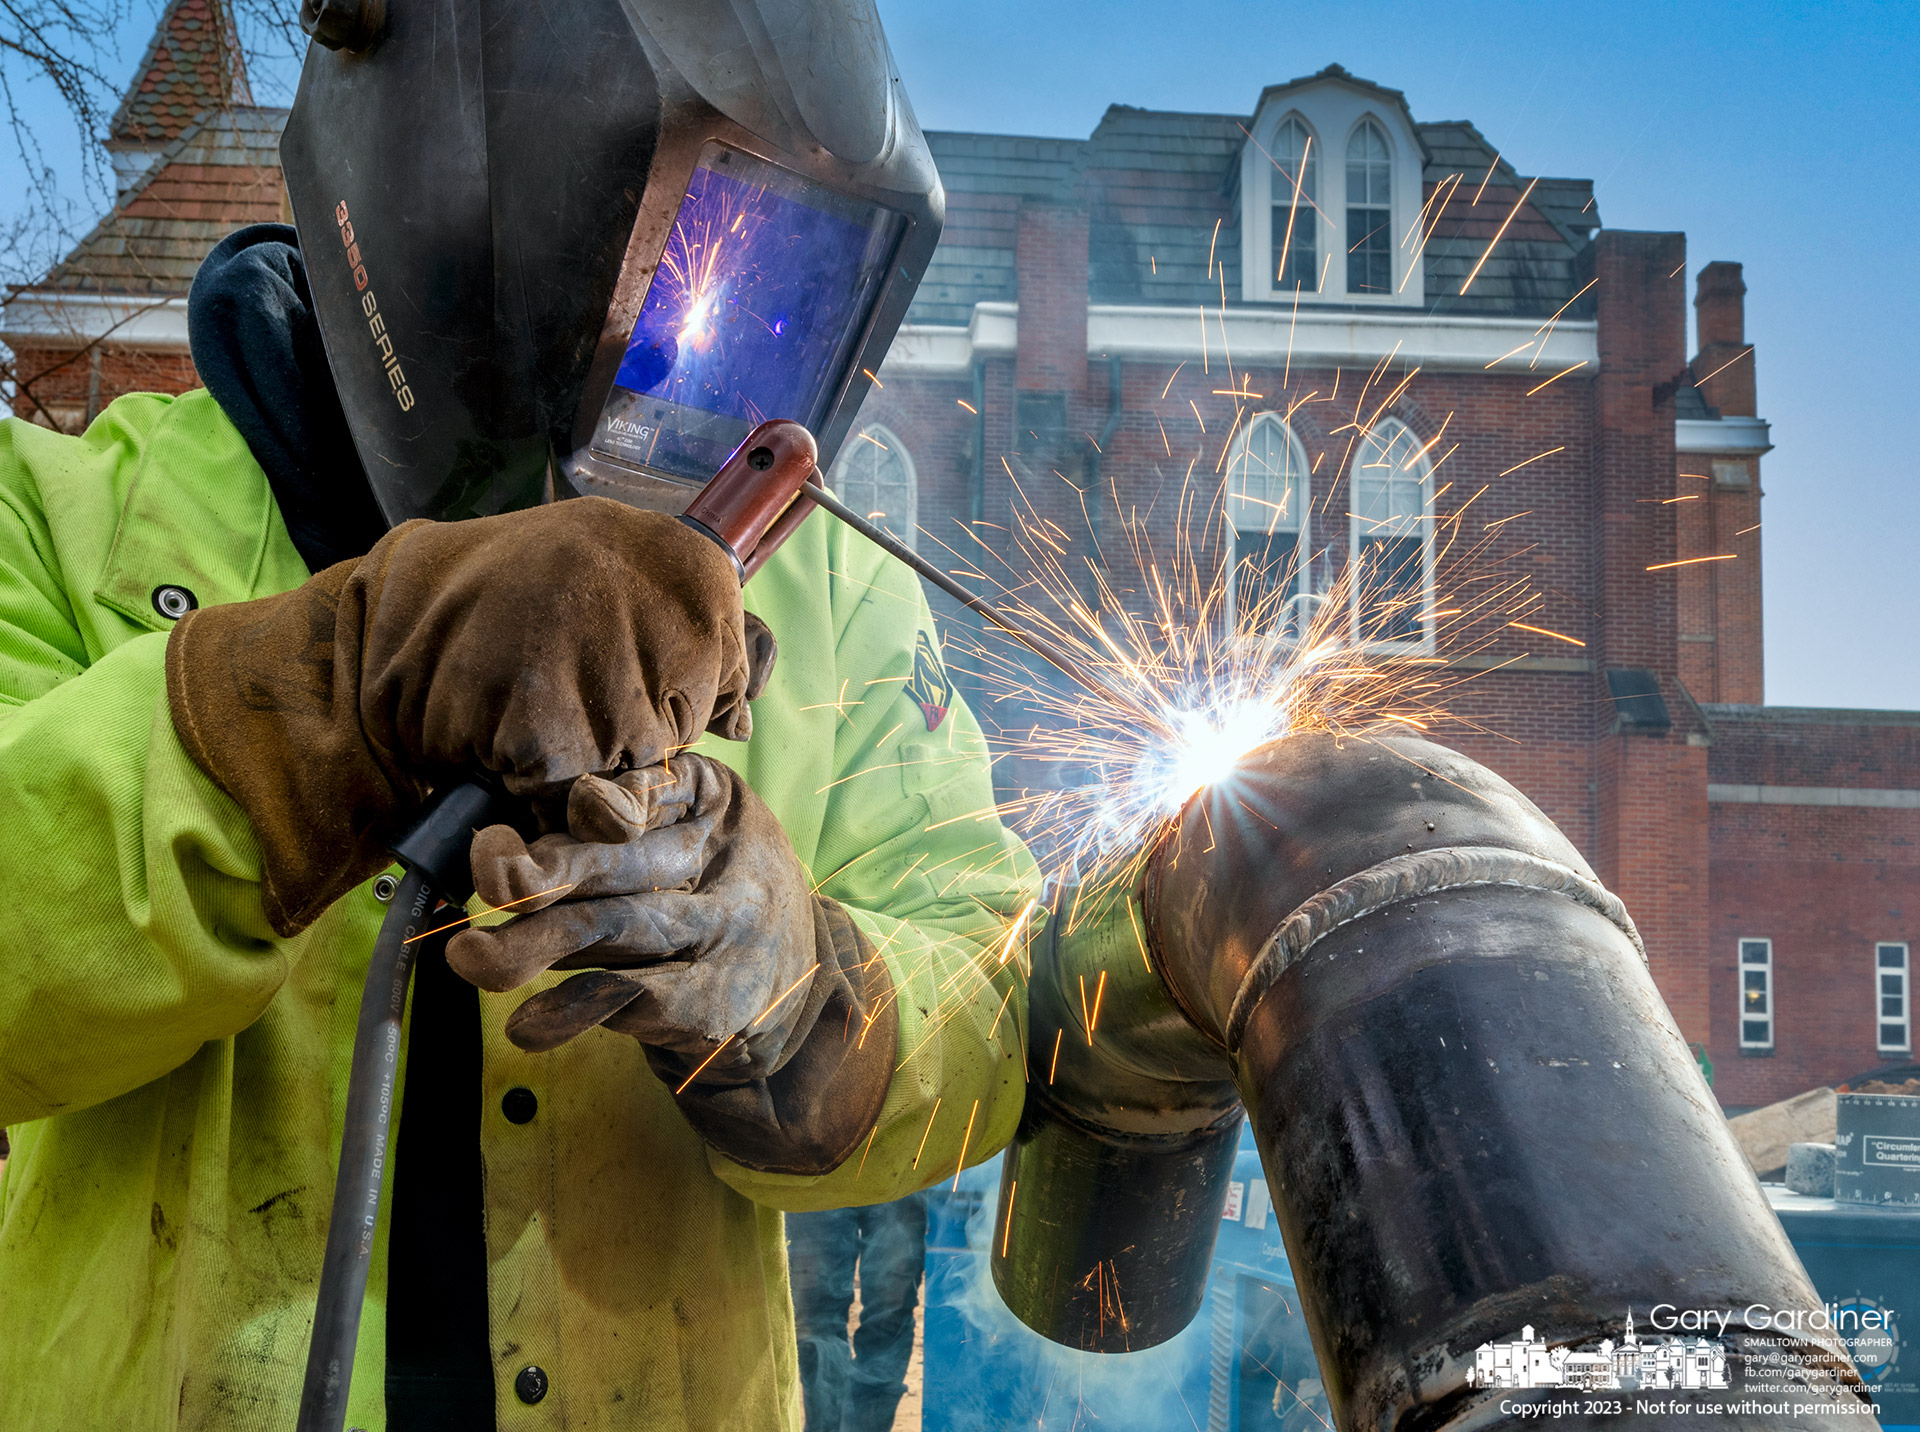 A welder fabricates a section of iron pipe that replaces portions of a pressurized 300-degree water heating system that failed filling the building with steam while students were on break. My Final Photo for February 8, 2023.